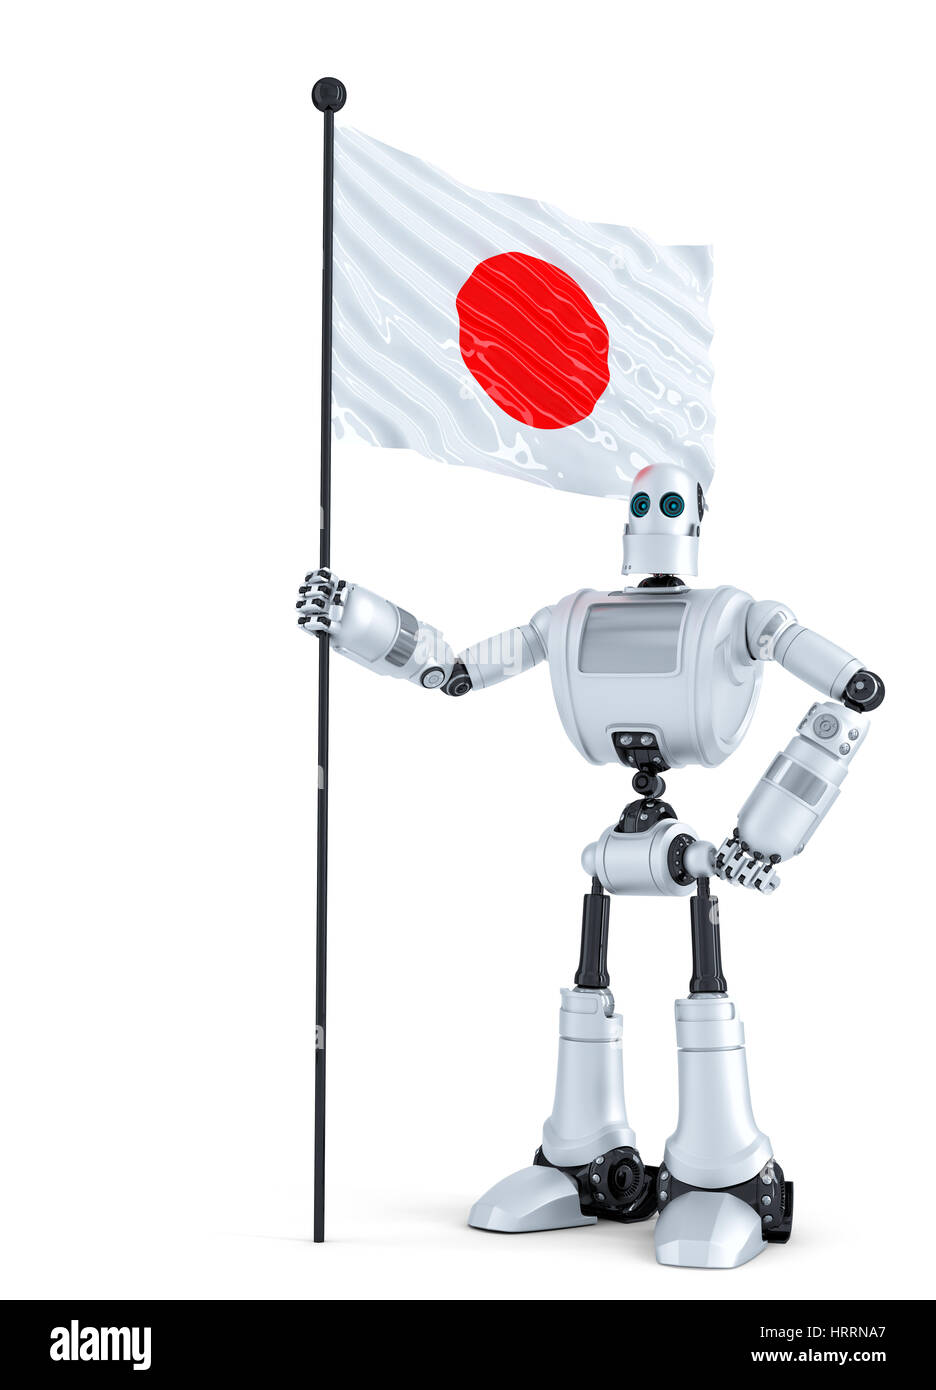 Android Robot standing with flag of Japan. Isolated on white. Contains clipping path Stock Photo